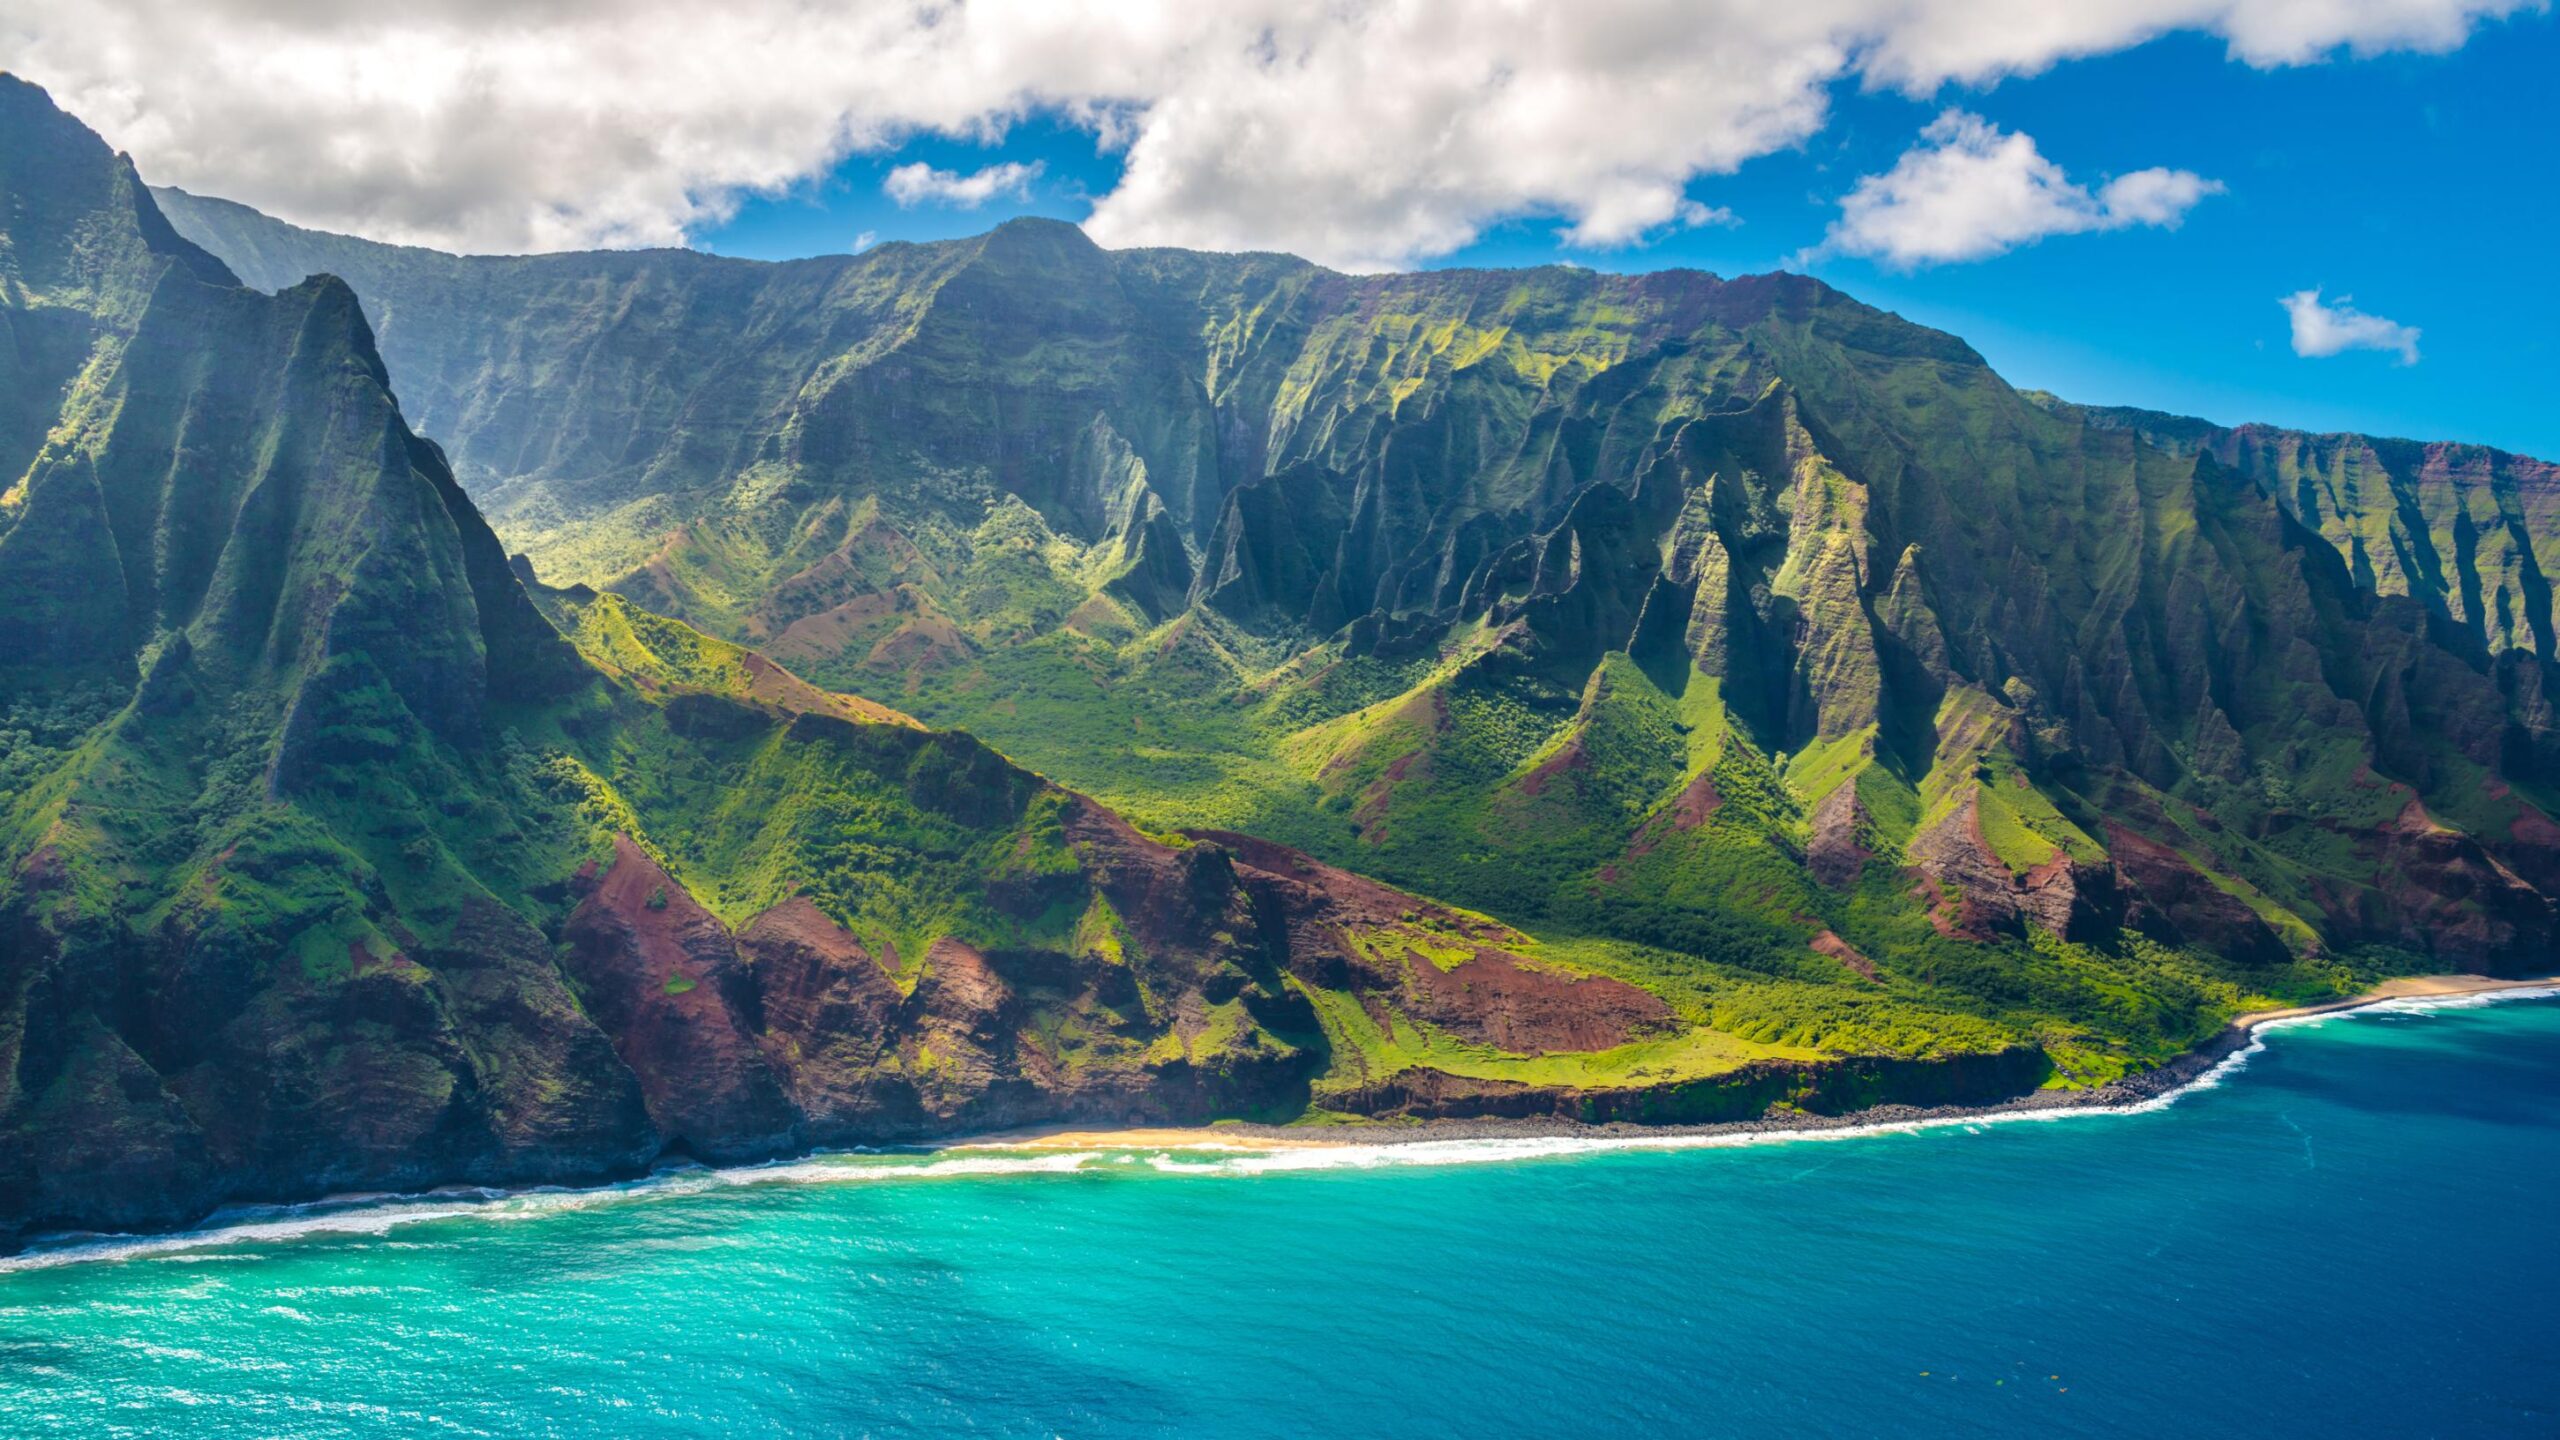 Non-stop flights from Vancouver to Hawaii (Honolulu) from only 323 CAD round-trip including GST!